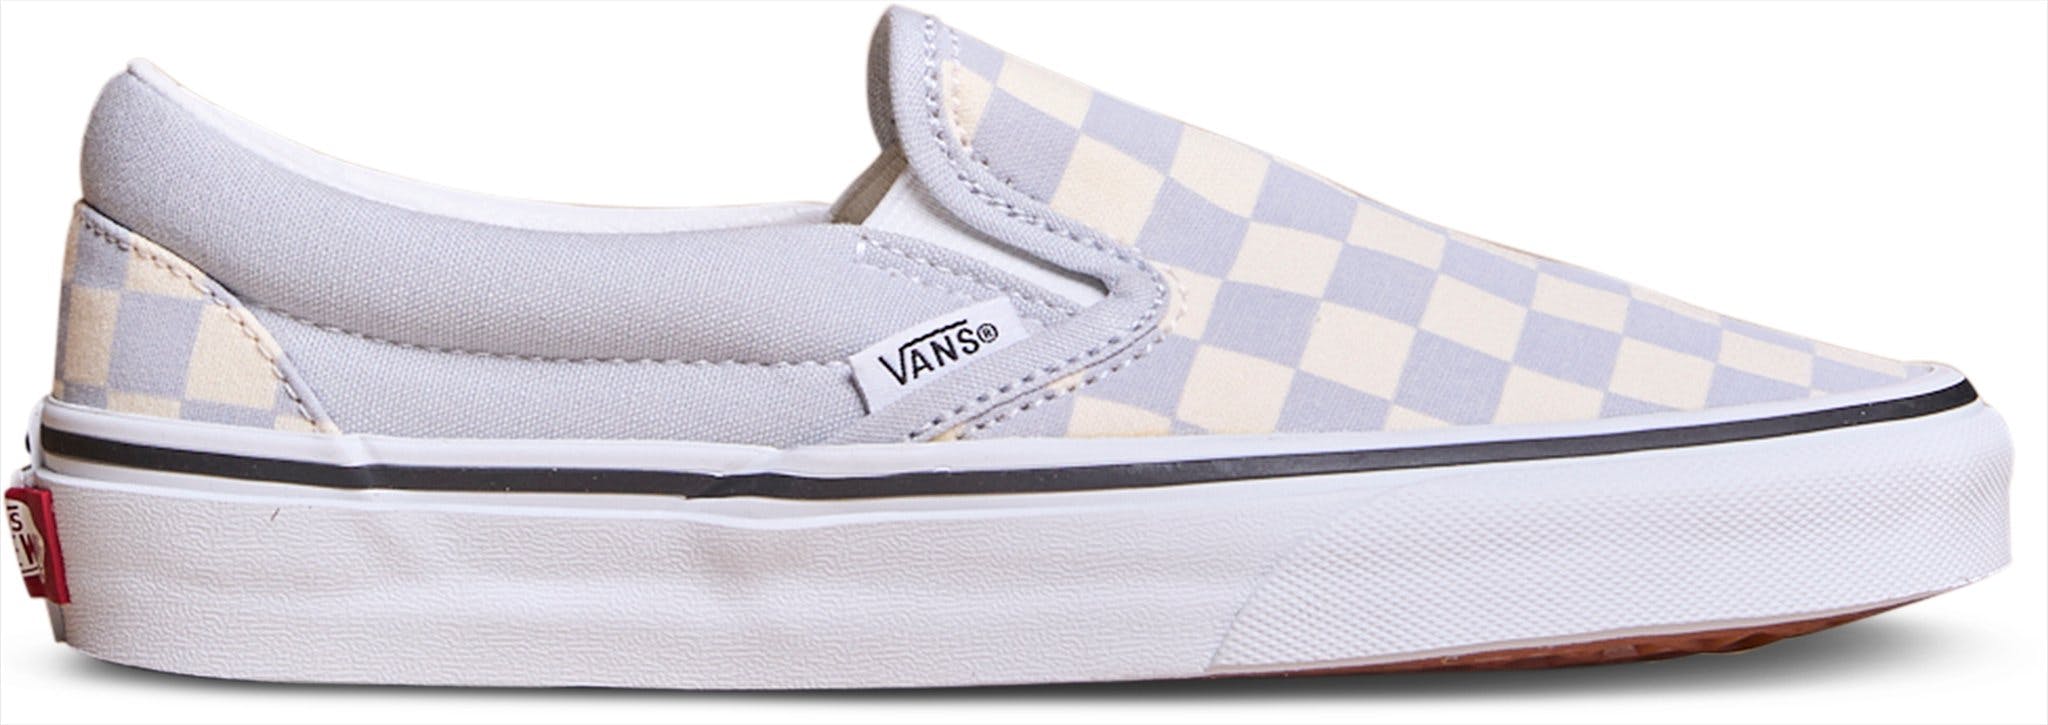 Product image for Checkerboard Classic Slip-On Shoes - Unisex